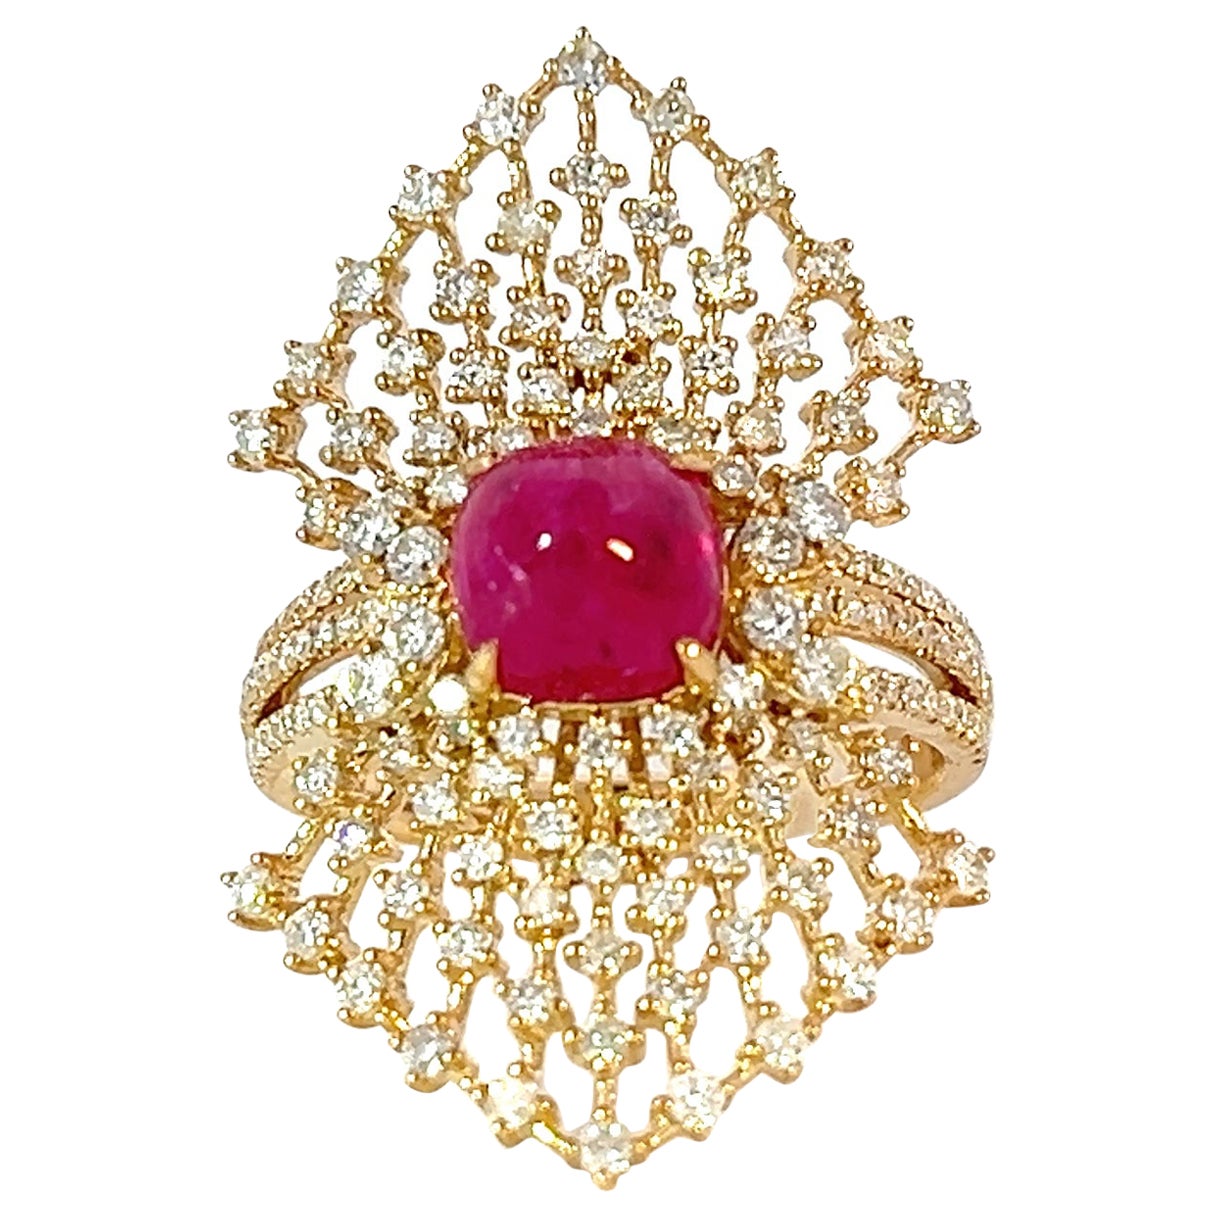 Elegant Firework Natural Cab Vivid Ruby 2.43 ct in 14k 1.17 ct Diamond Band Ring For Sale